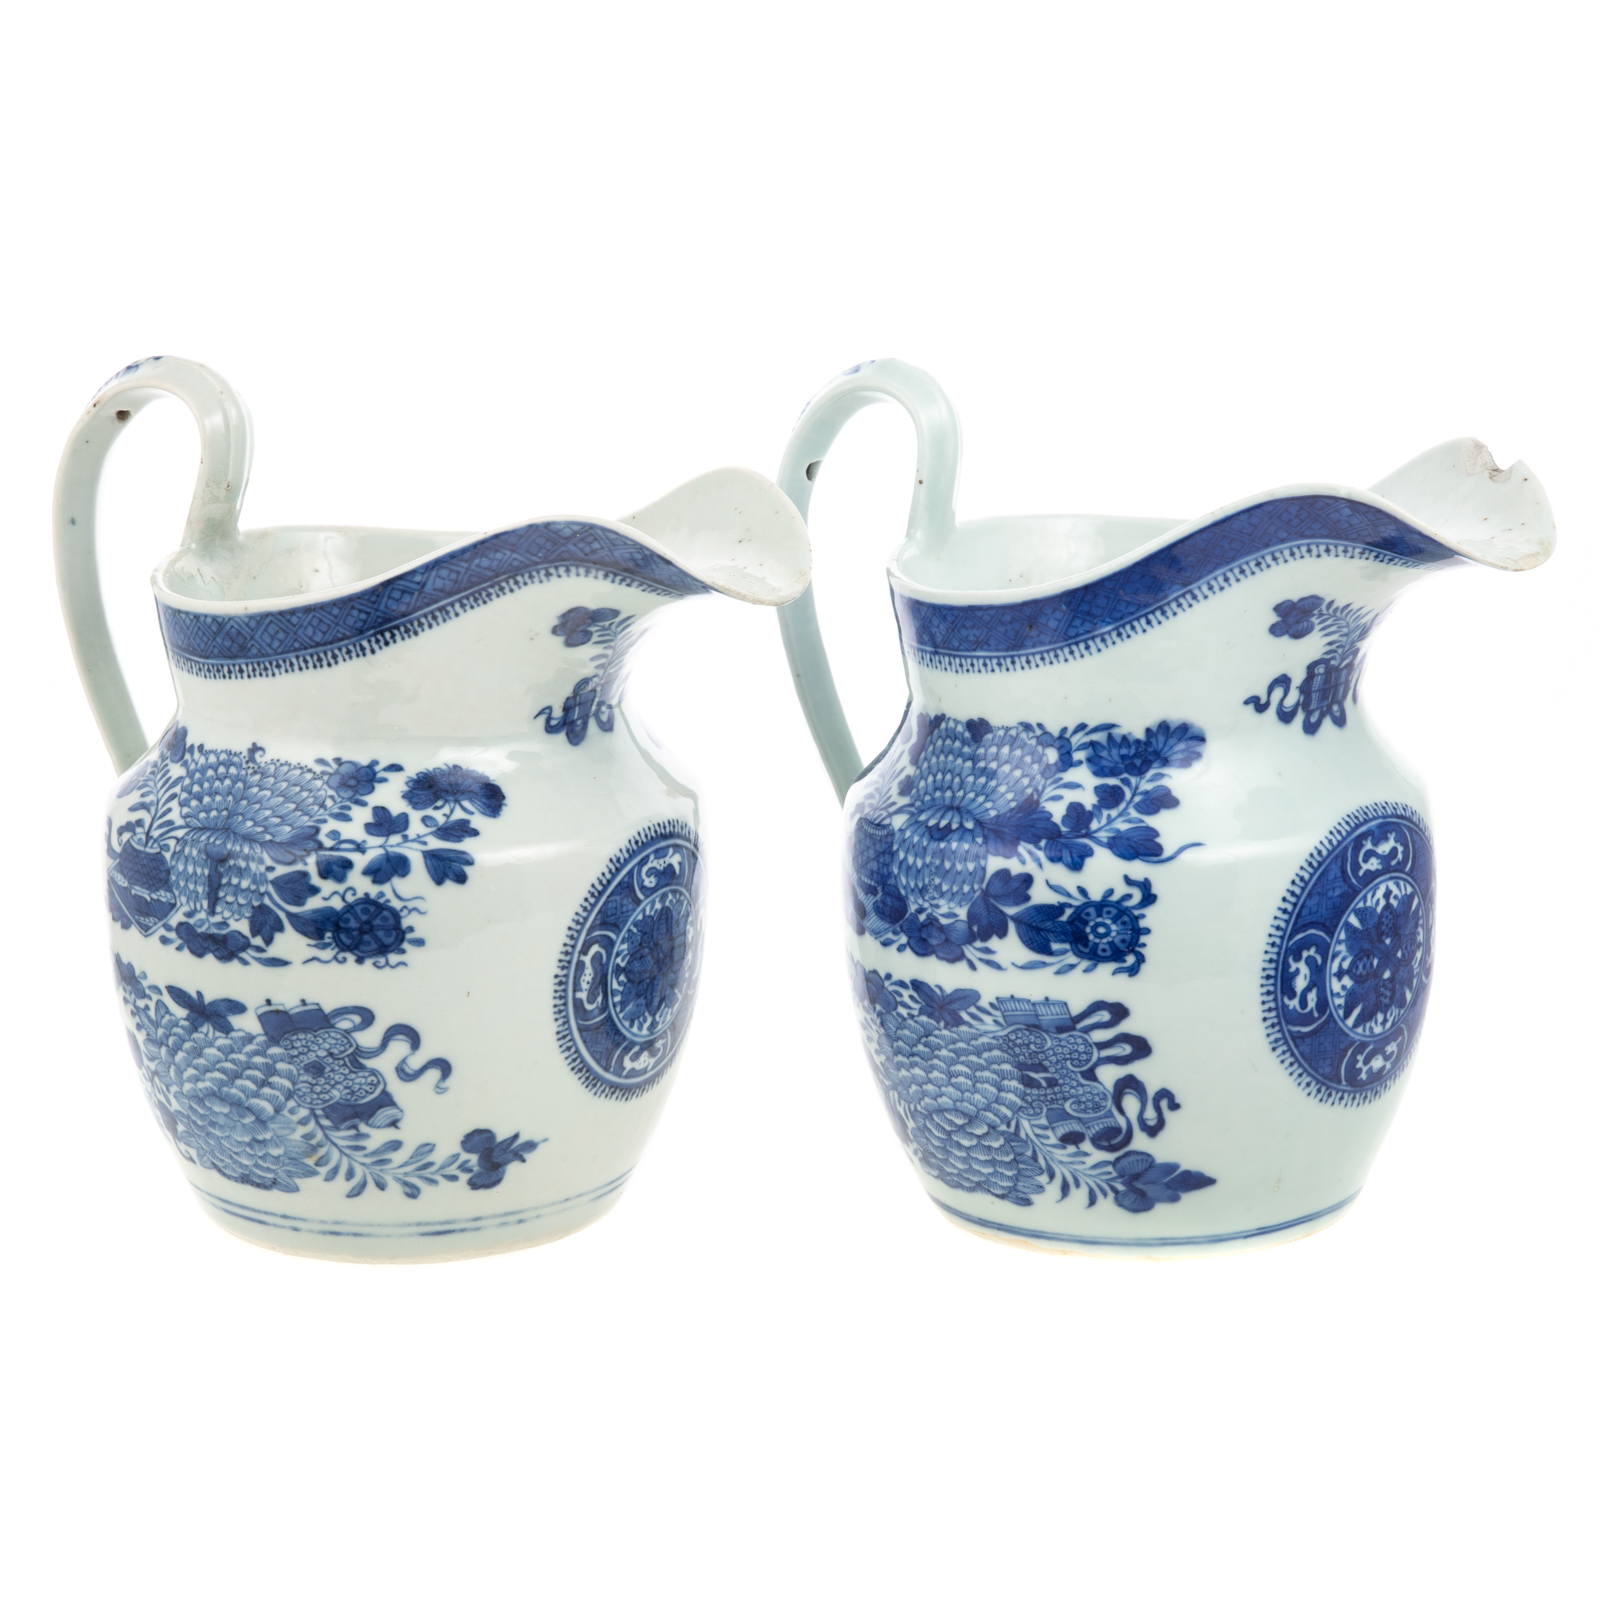 TWO CHINESE EXPORT BLUE FITZHUGH 3cb79e